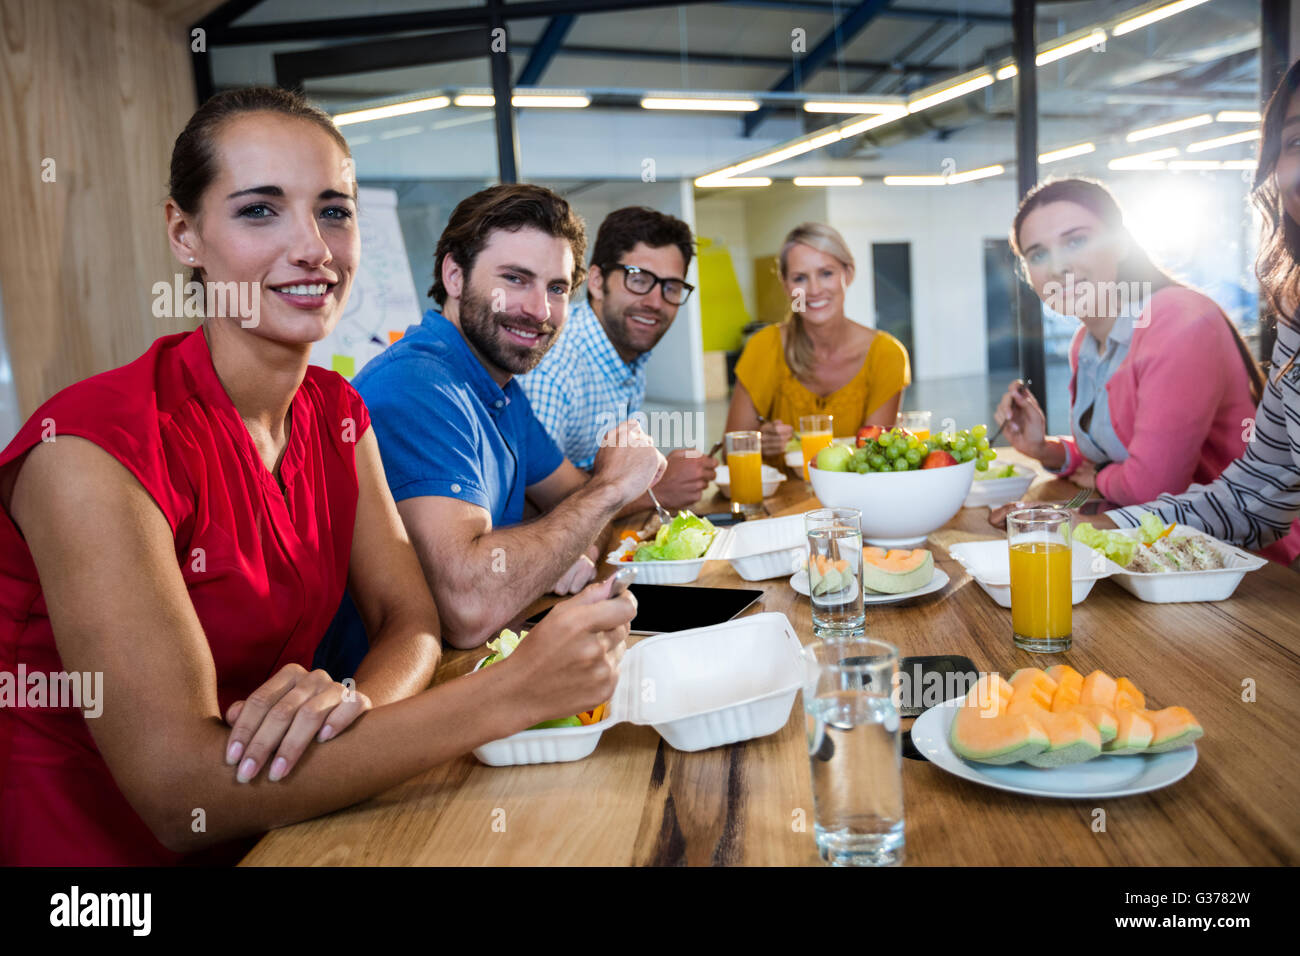 Casual business team eating together Stock Photo